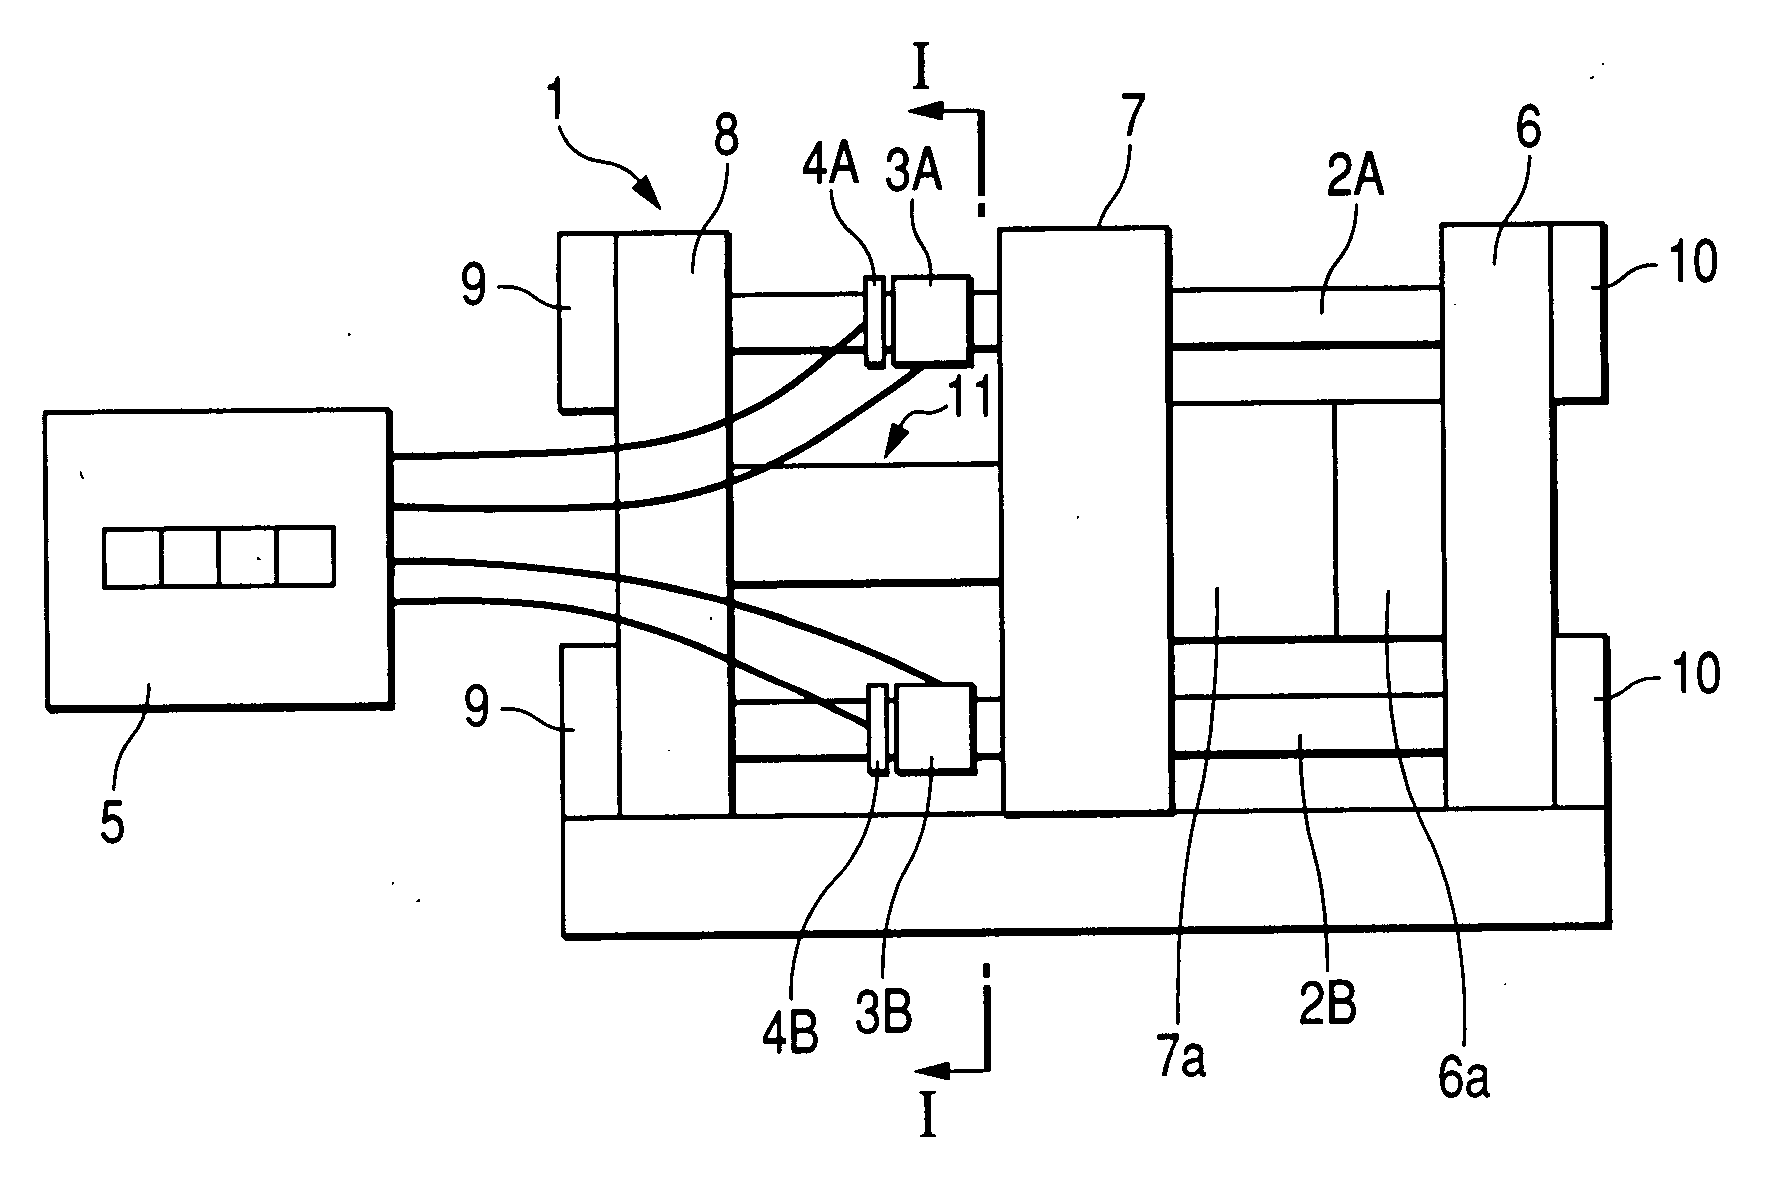 Mold clamping apparatus of injection molding machine and method of adjusting effective length of tie bar